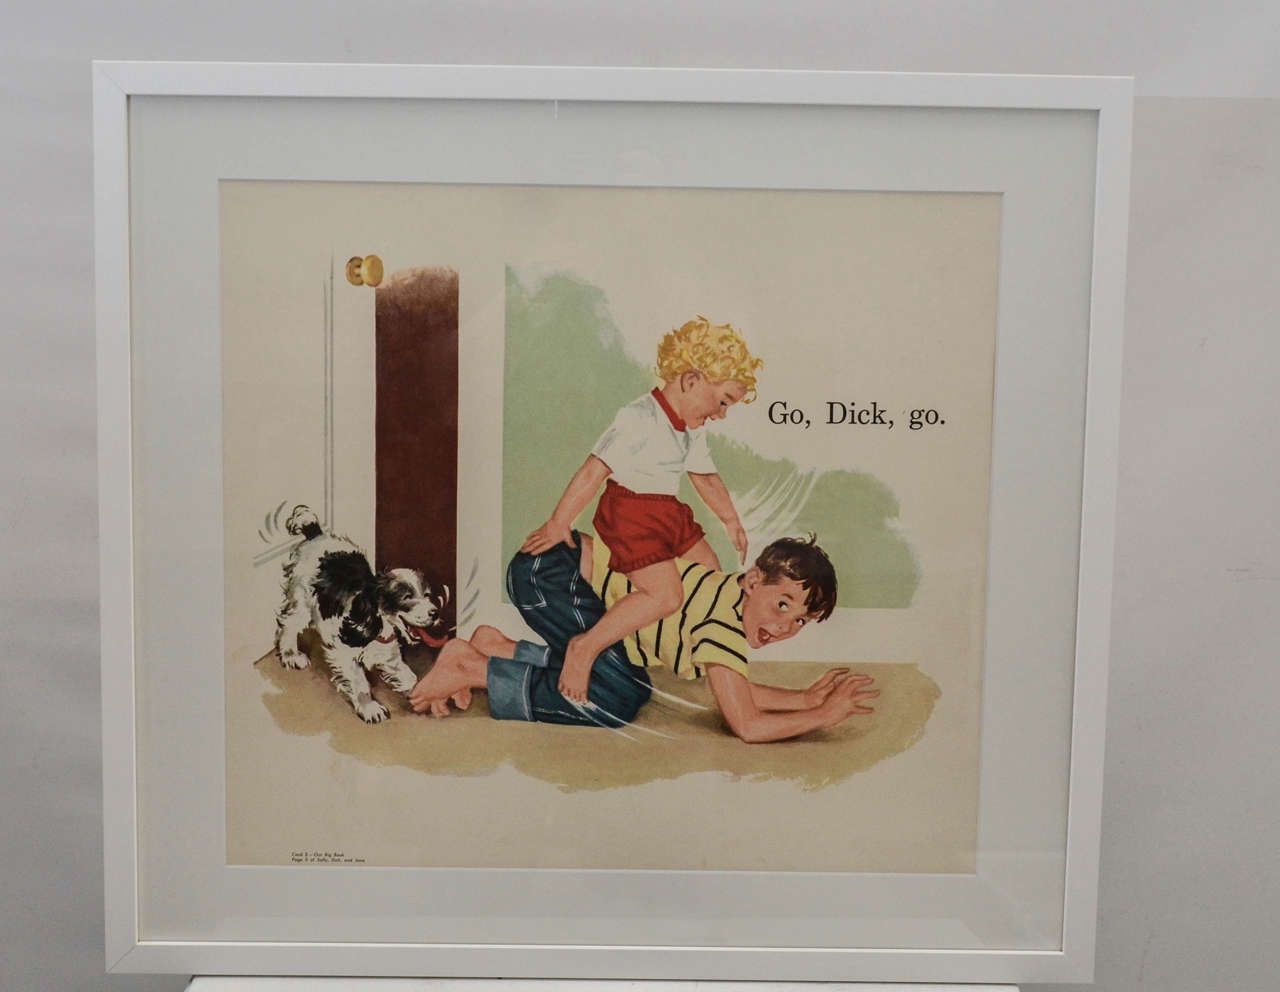 A unique pair of vintage framed prints from the beloved children's books 